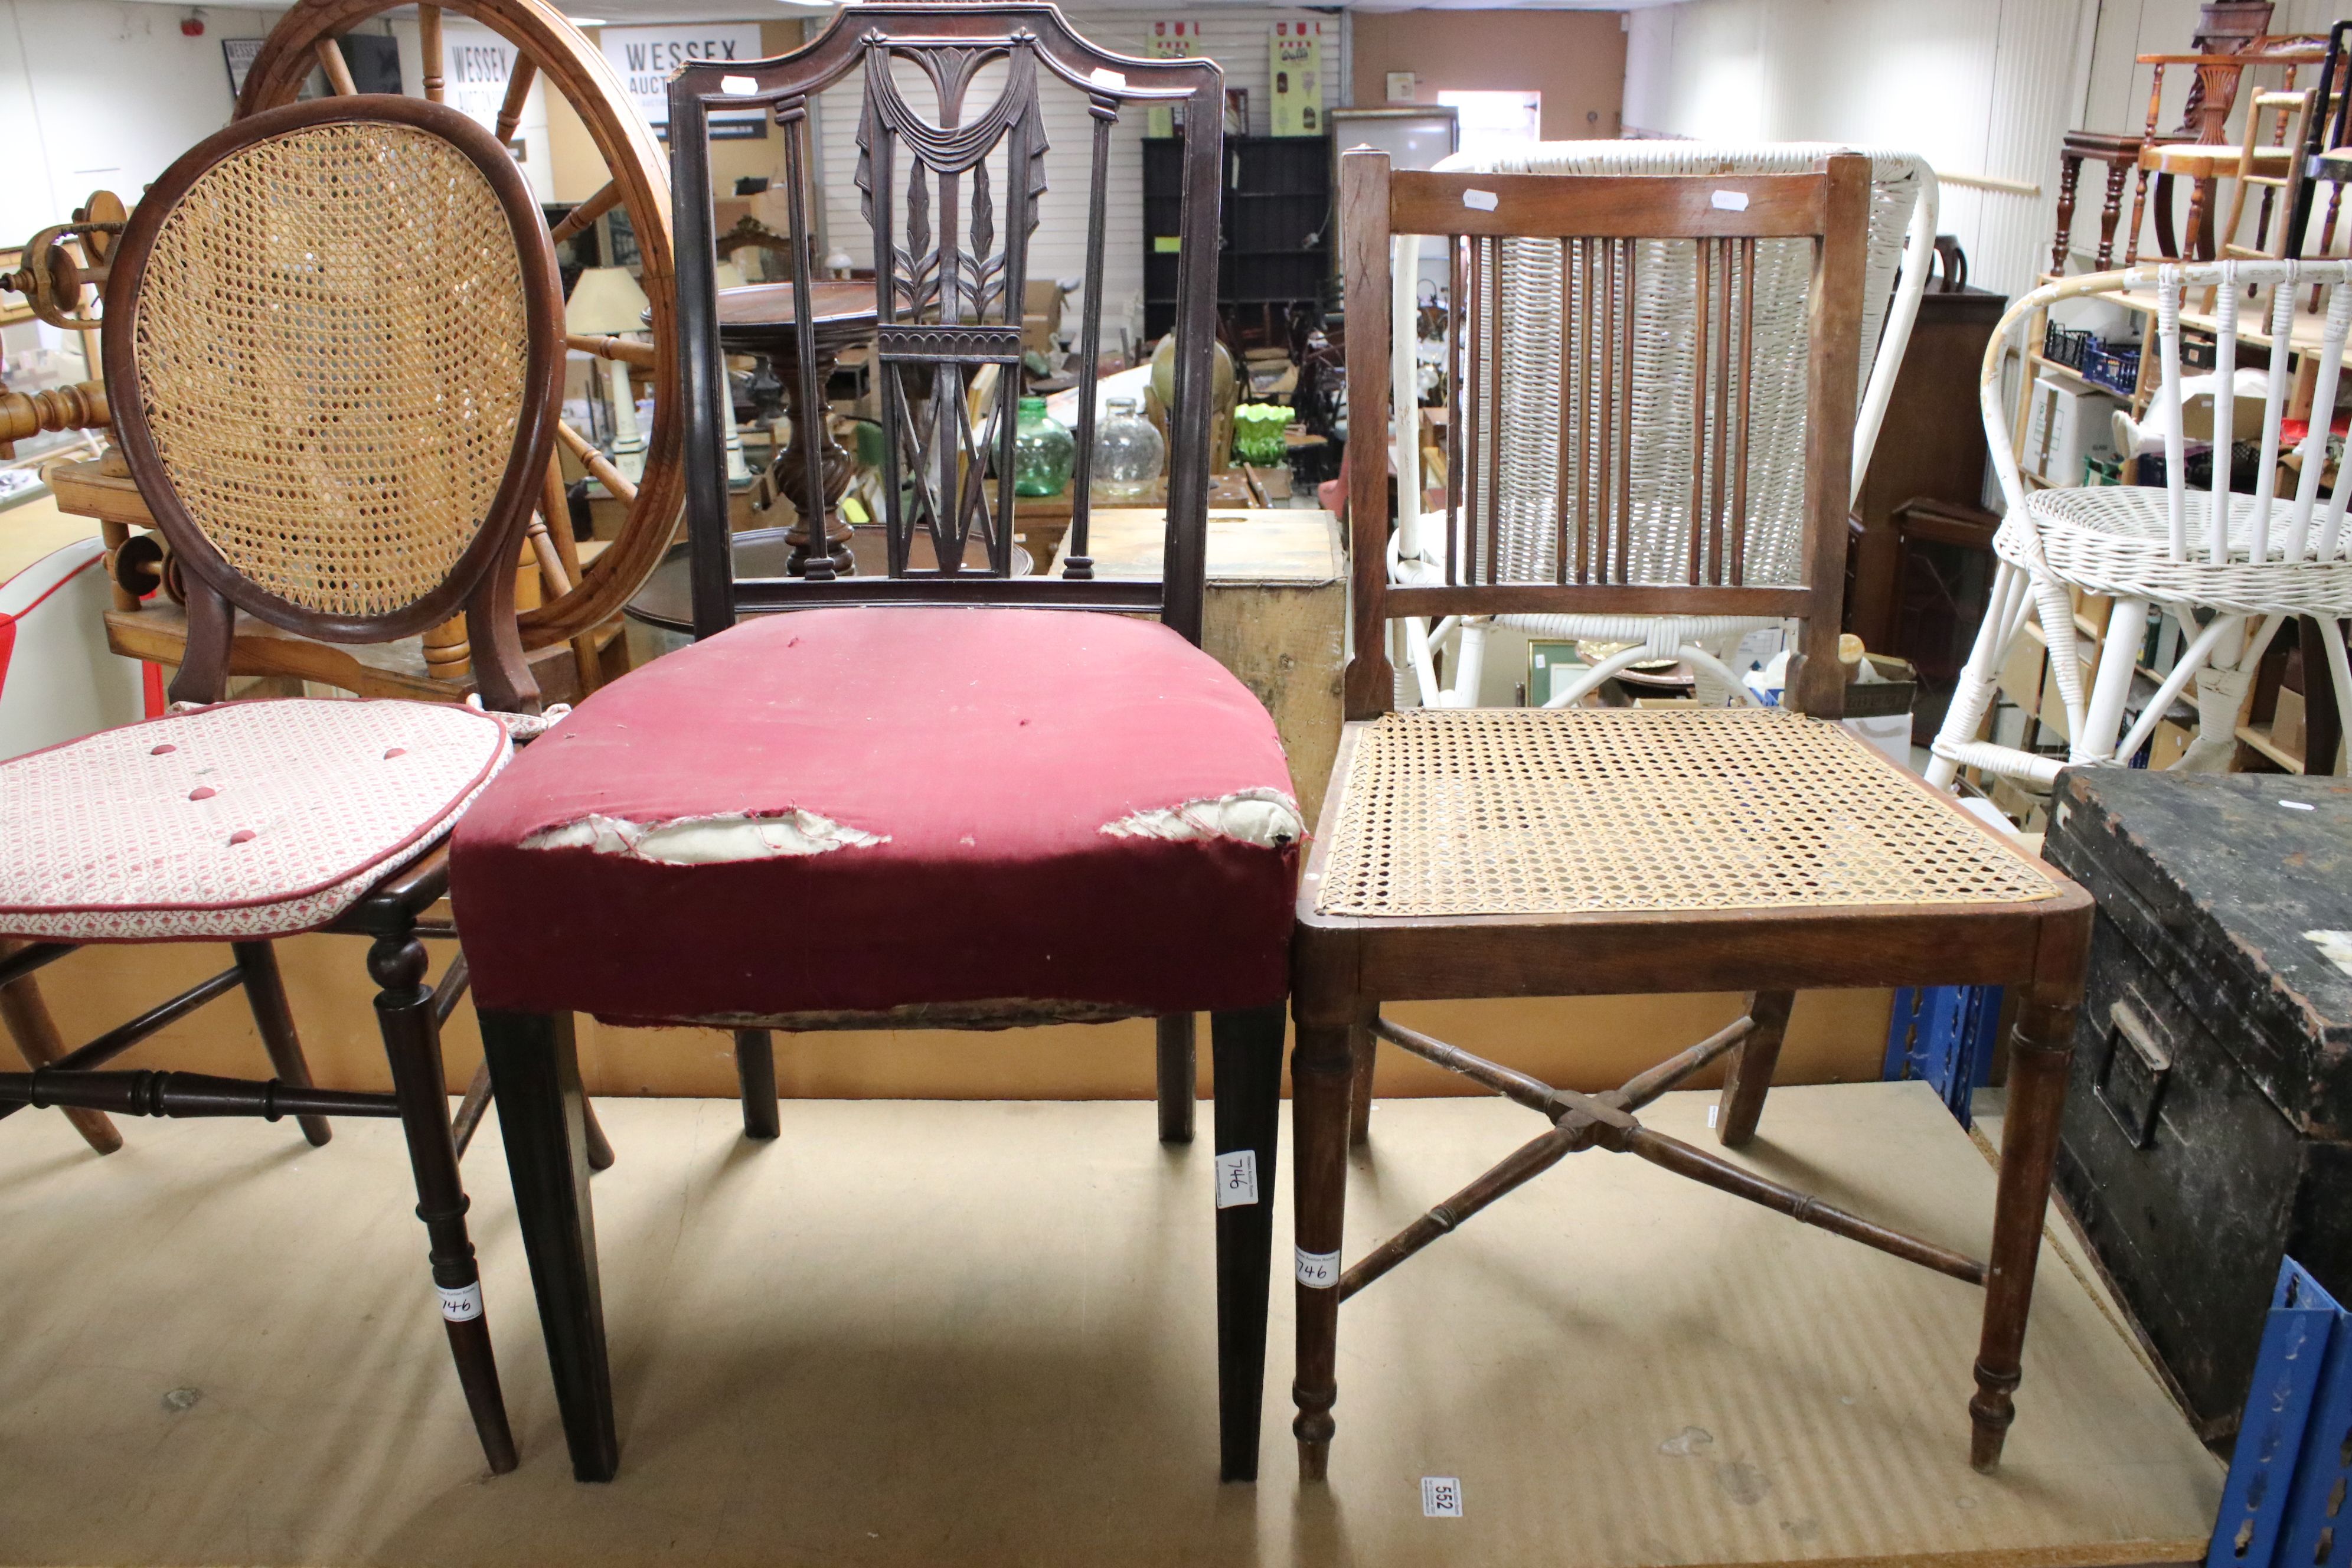 Collection of Five Chairs including Pair of 19th century Bedroom Chairs with Cane Seats - Image 2 of 4